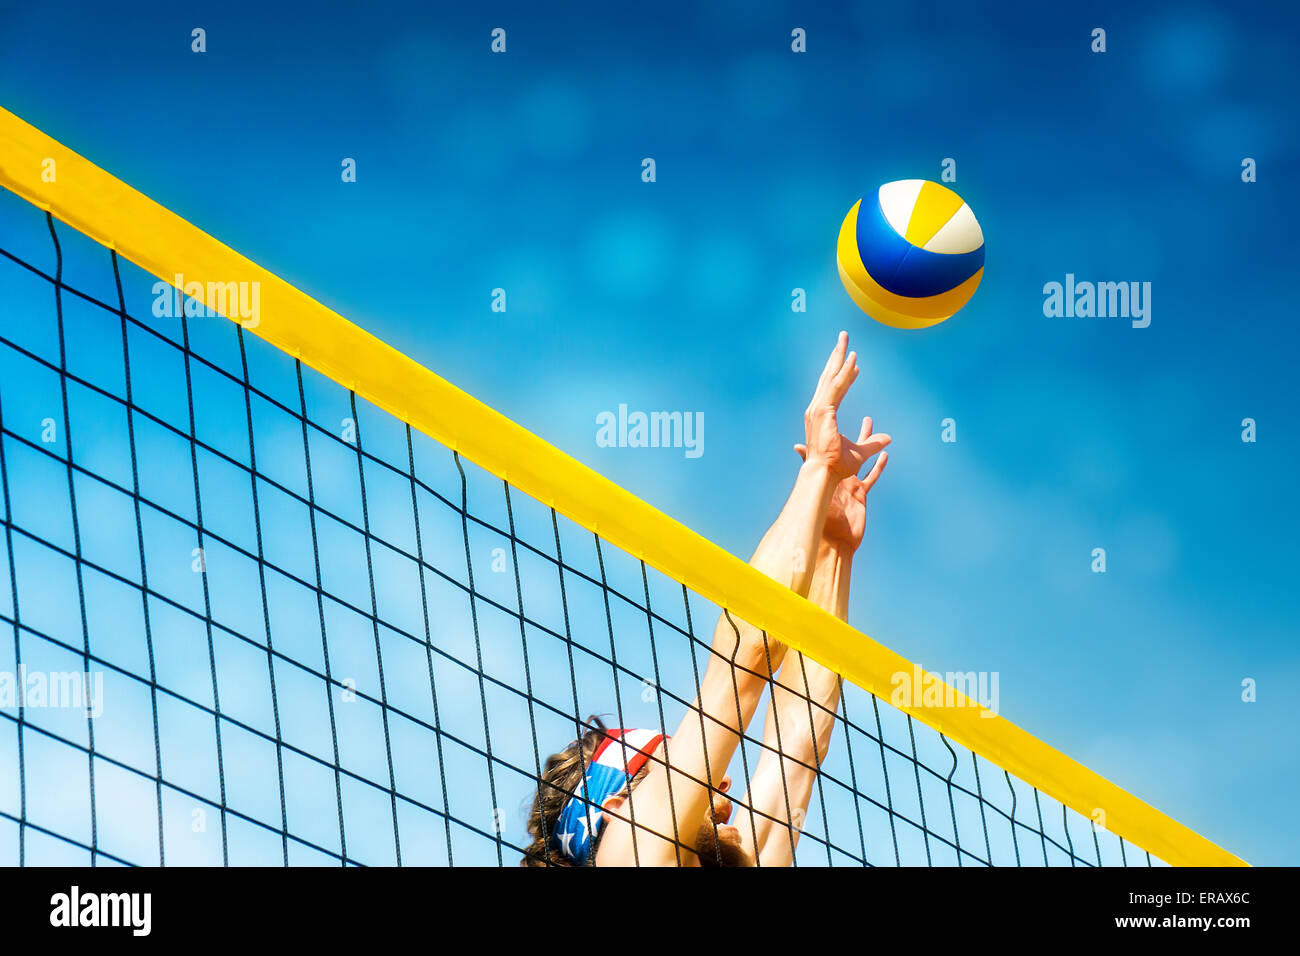 Beachvolley ball player jumps on the net and tries to  blocks the ball Stock Photo